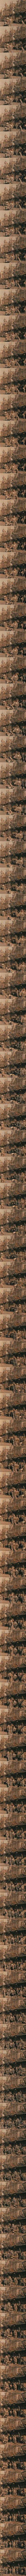 Tokyo 1913 collection image